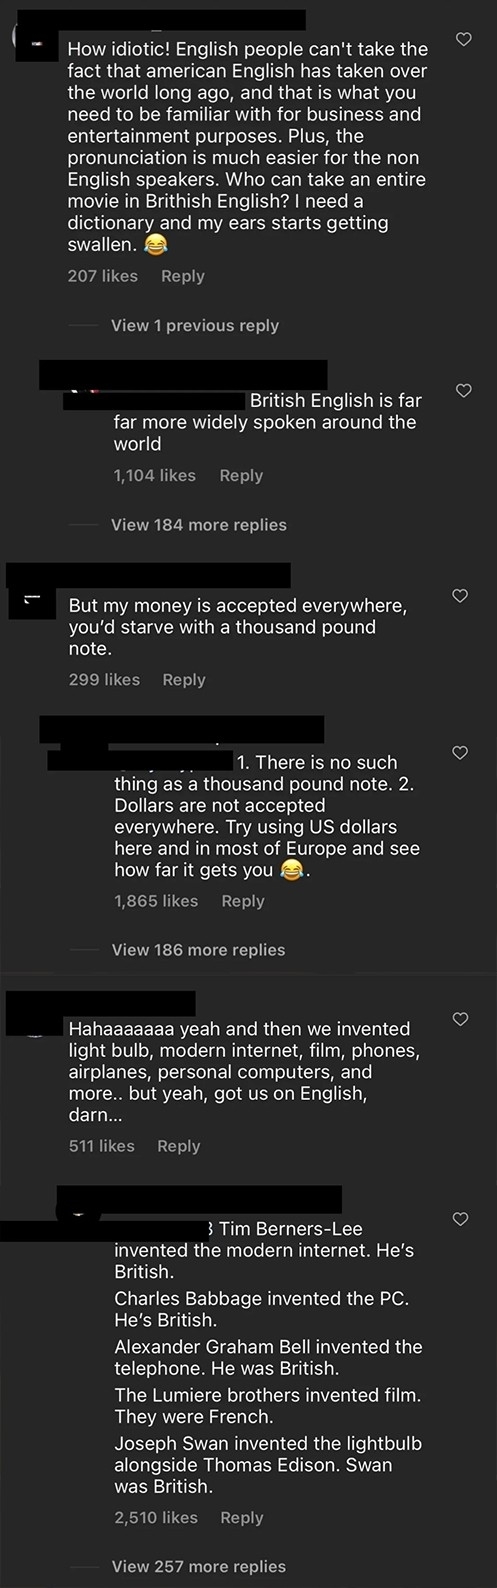 person argues about american english, money, and inventions being more widespread, and is quickly corrected